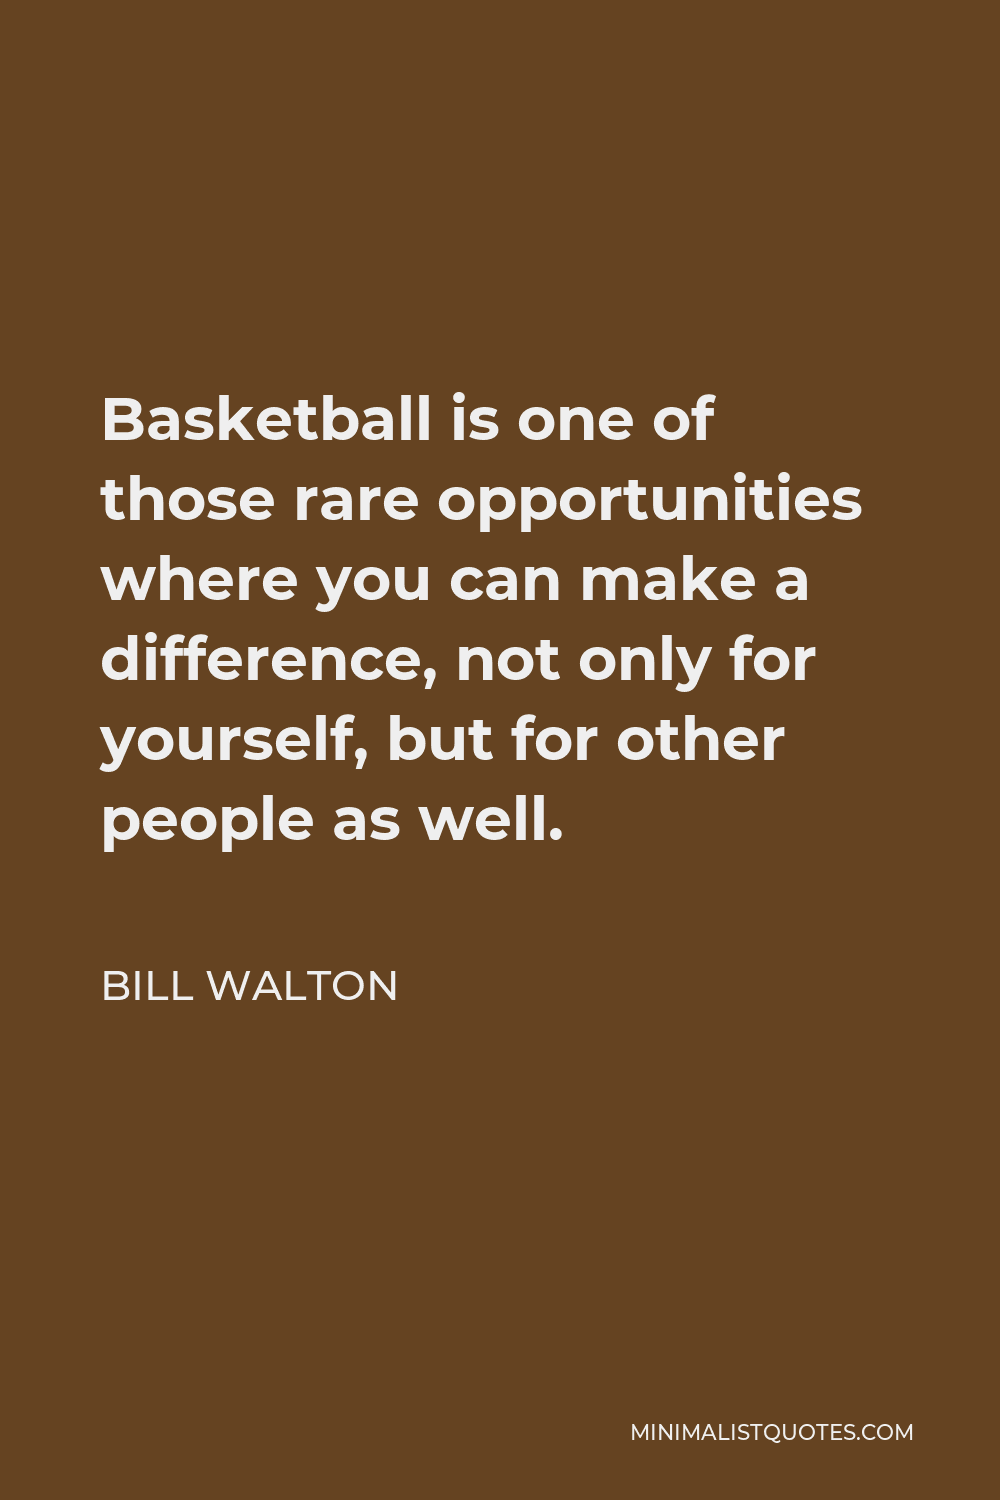 Bill Walton Quote - Basketball is one of those rare opportunities where you can make a difference, not only for yourself, but for other people as well.